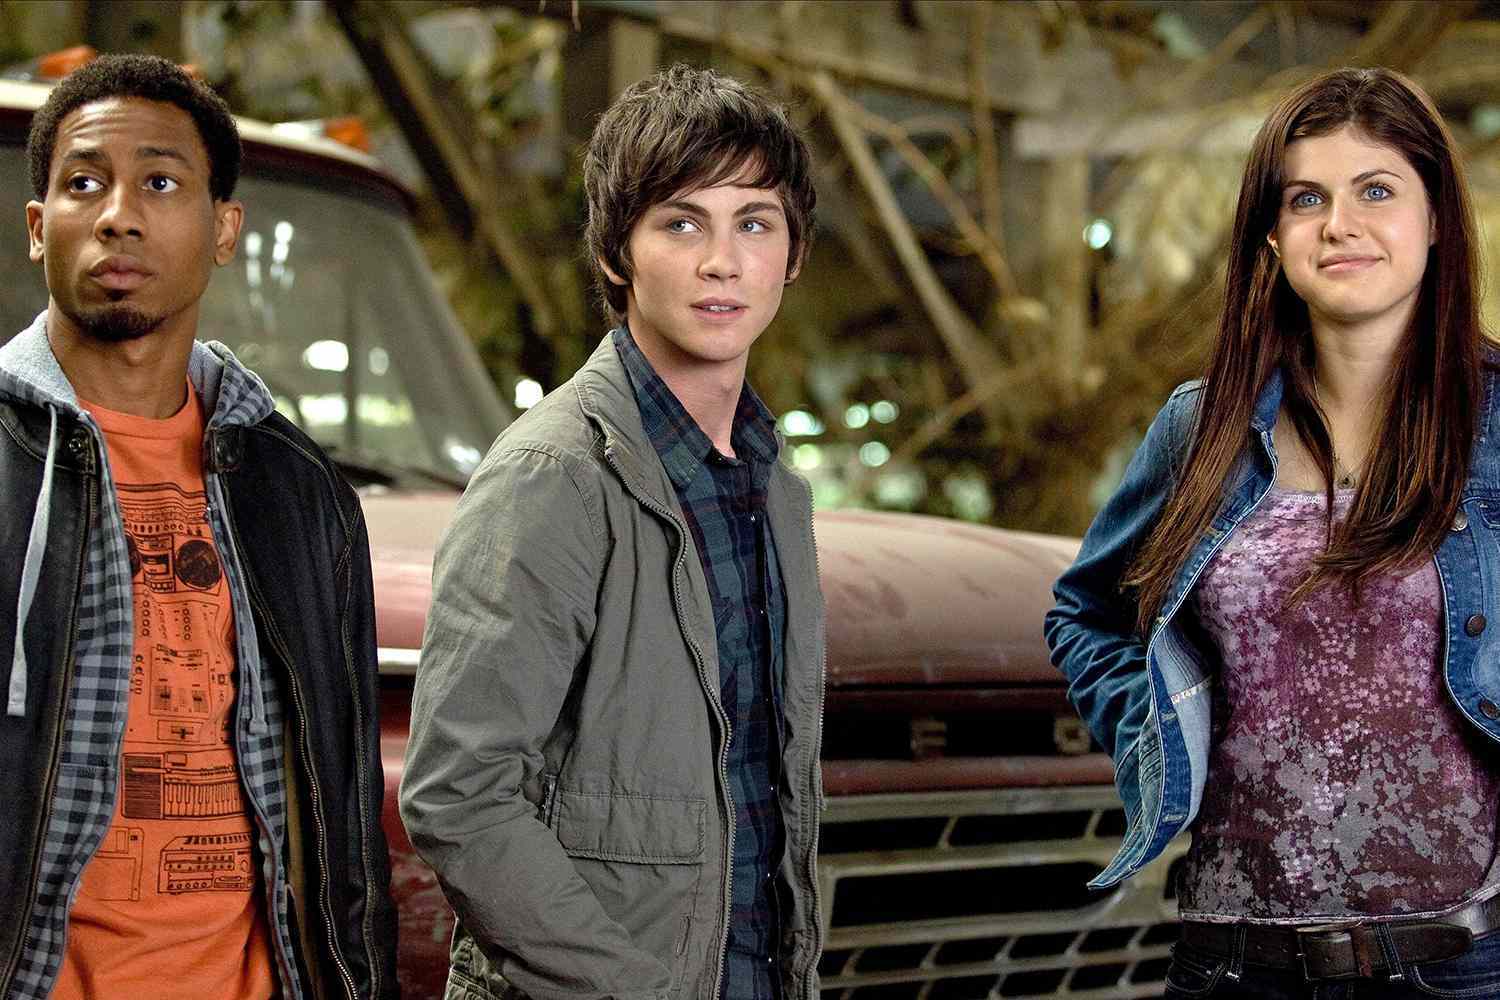 Percy Jackson returns. Why the new TV series about the boy demigod is being hailed as a potential masterpiece